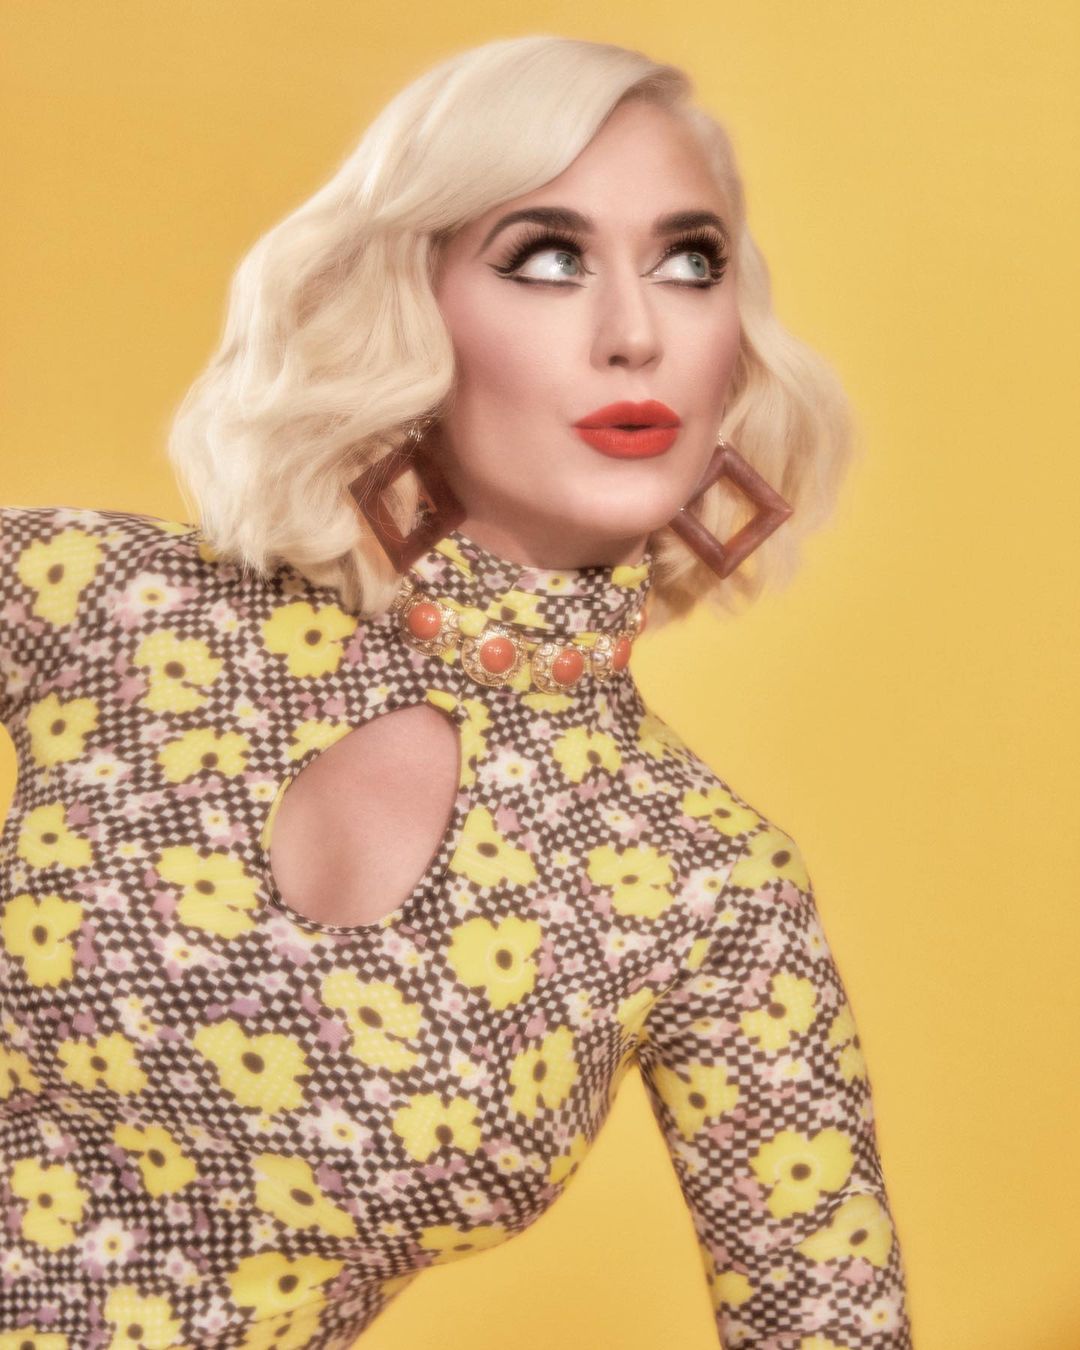 Katy Perry Hairstyle 28 Katy Perry 2023 | Katy Perry blonde hair | Katy Perry bob haircut Katy Perry Hairstyles